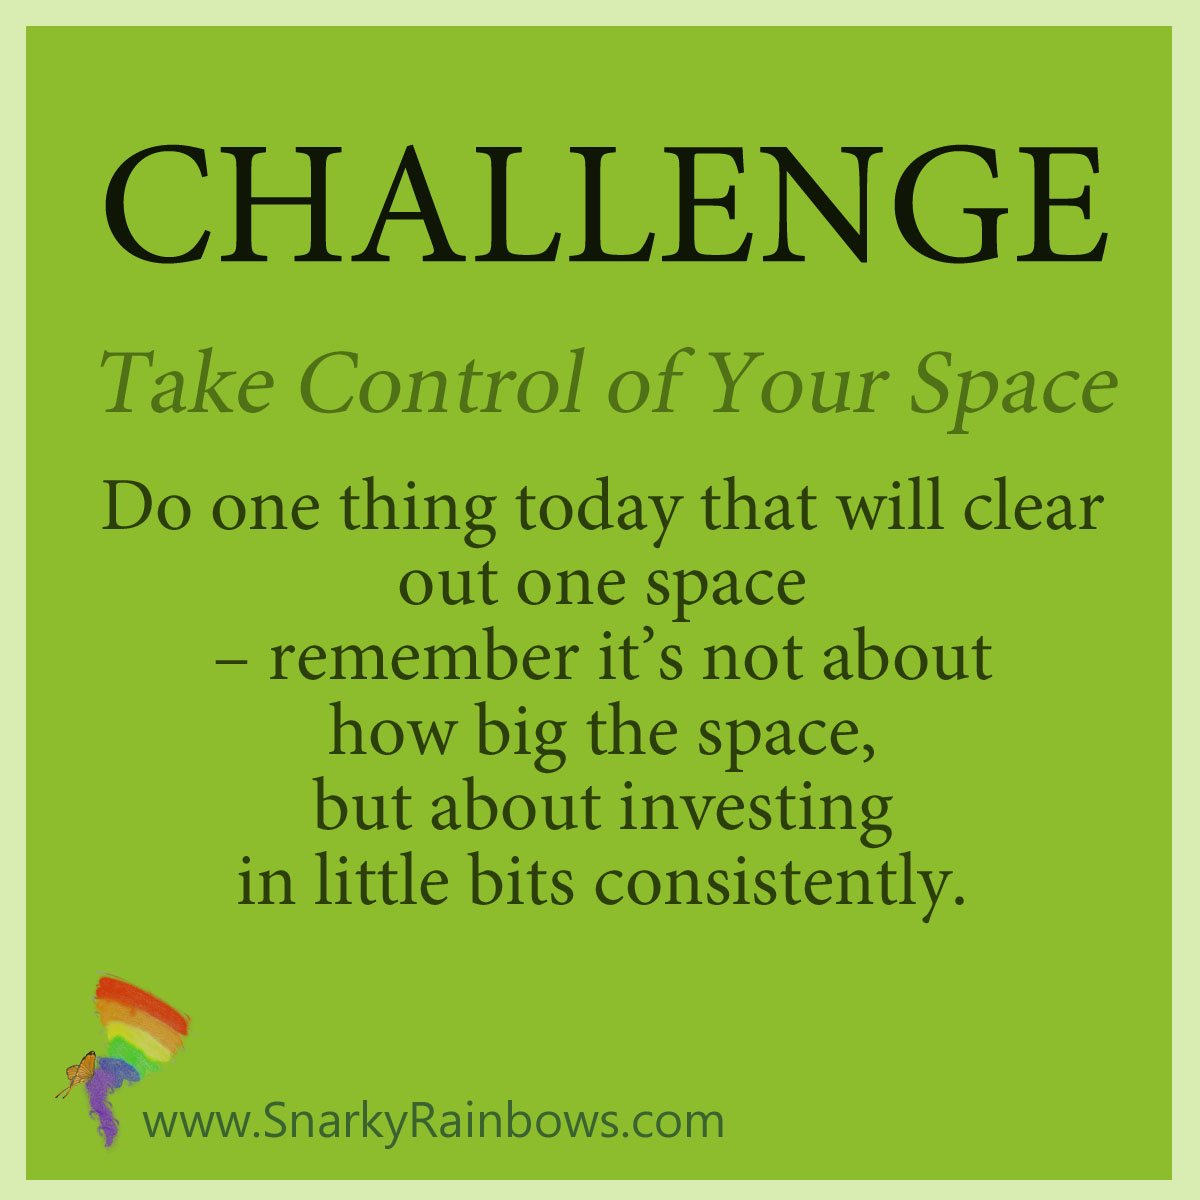 Daily Challenge - take control of your space